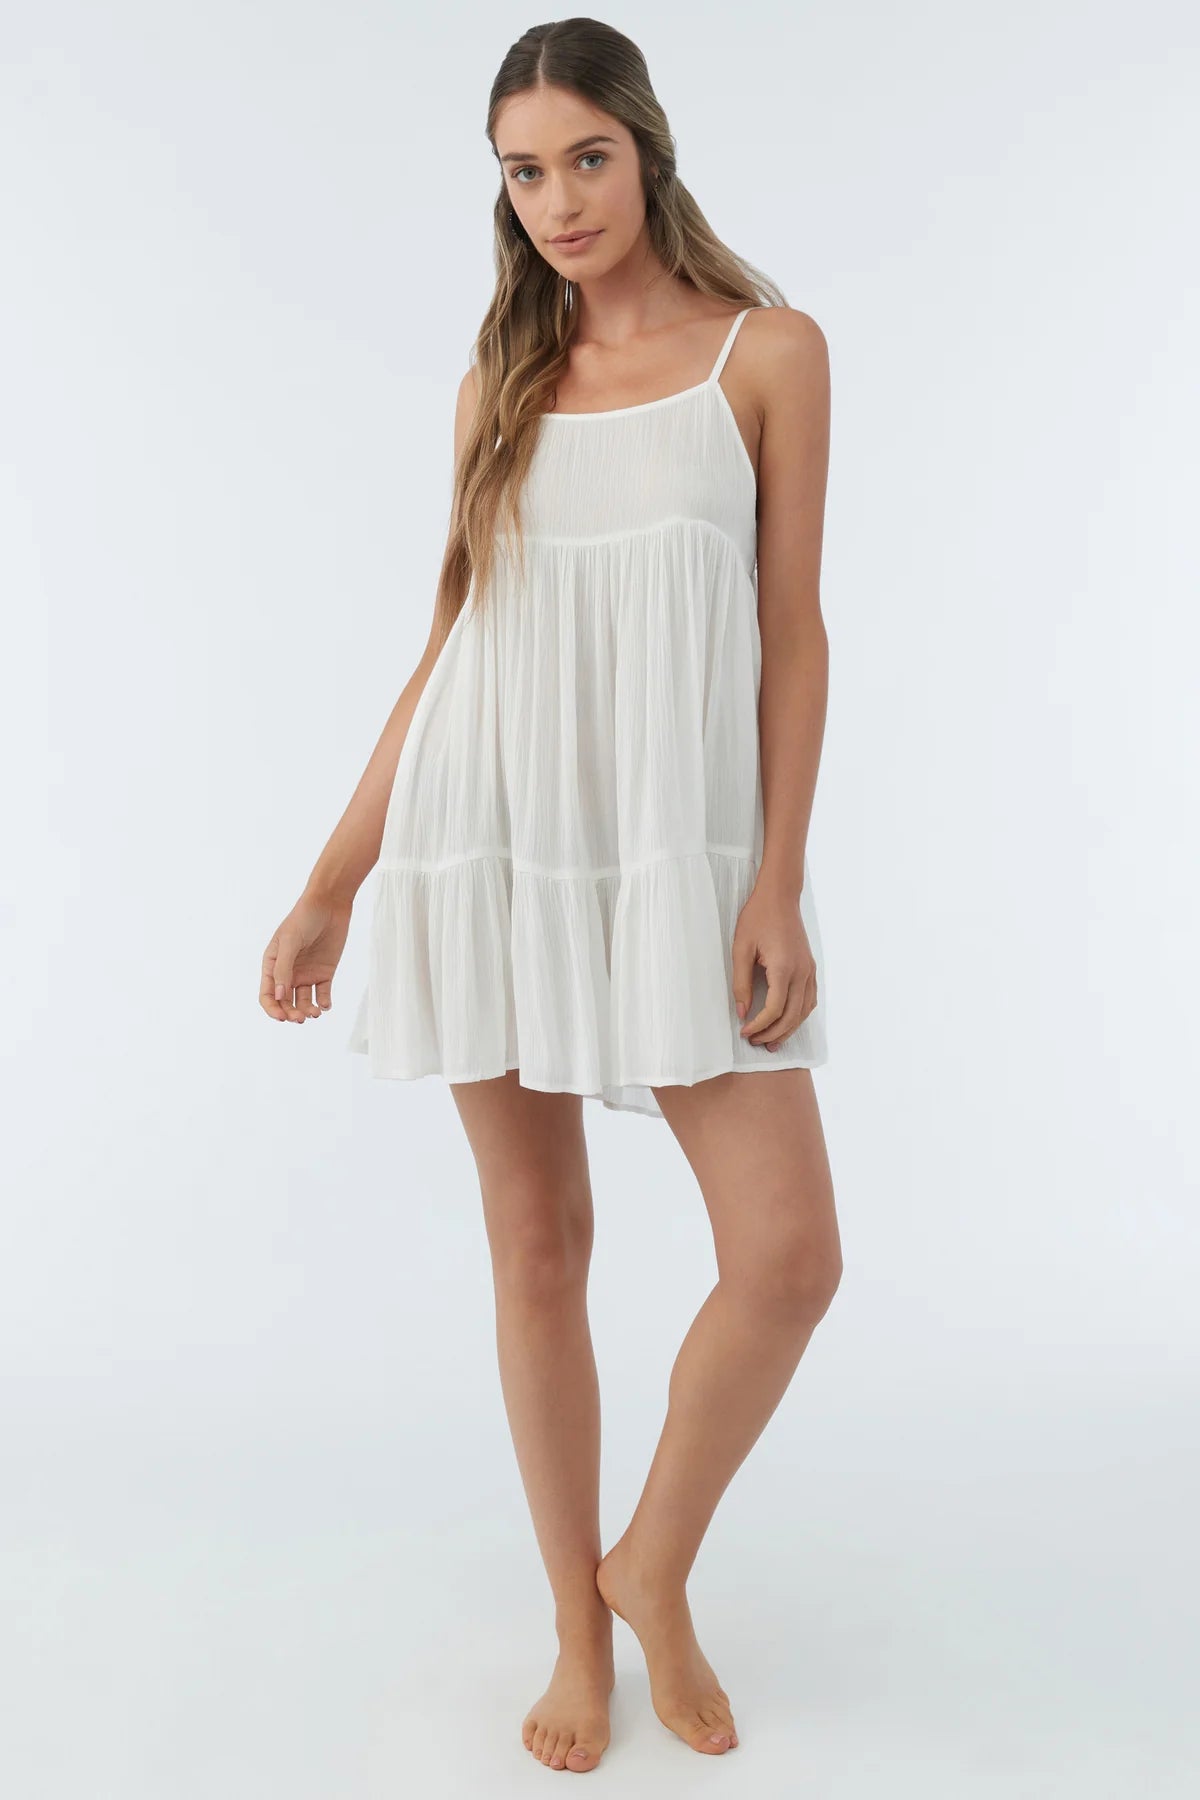 O'Neill Rilee Short Tank Coverup Dress (Non-Current)